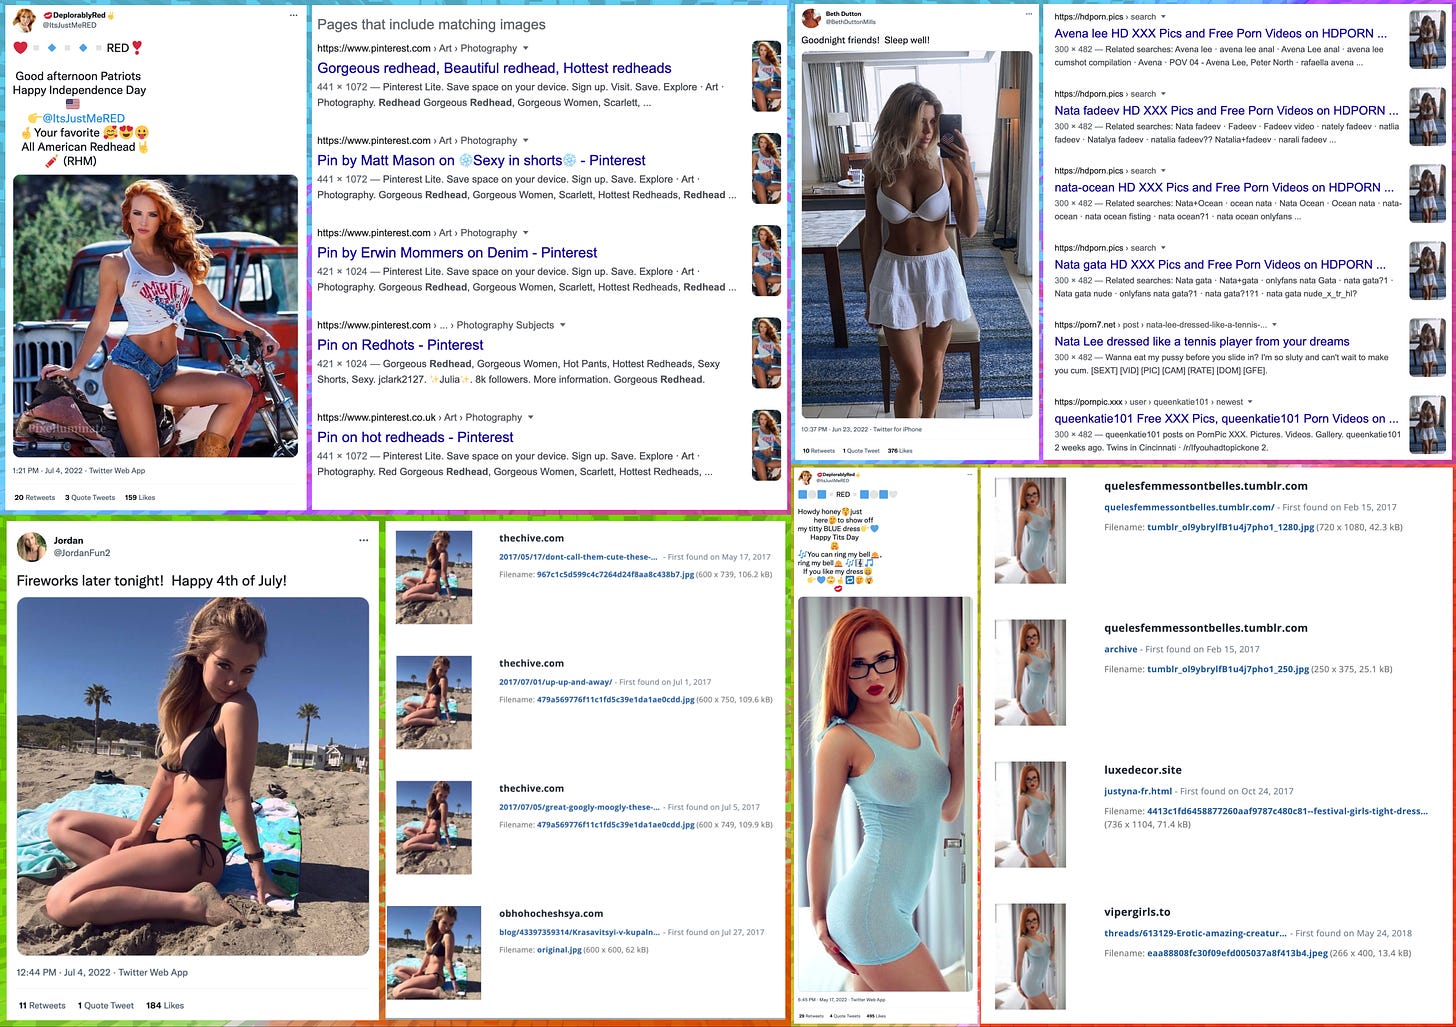 screenshots of image tweets, and reverse image searches demonstrating the images are plagiarized